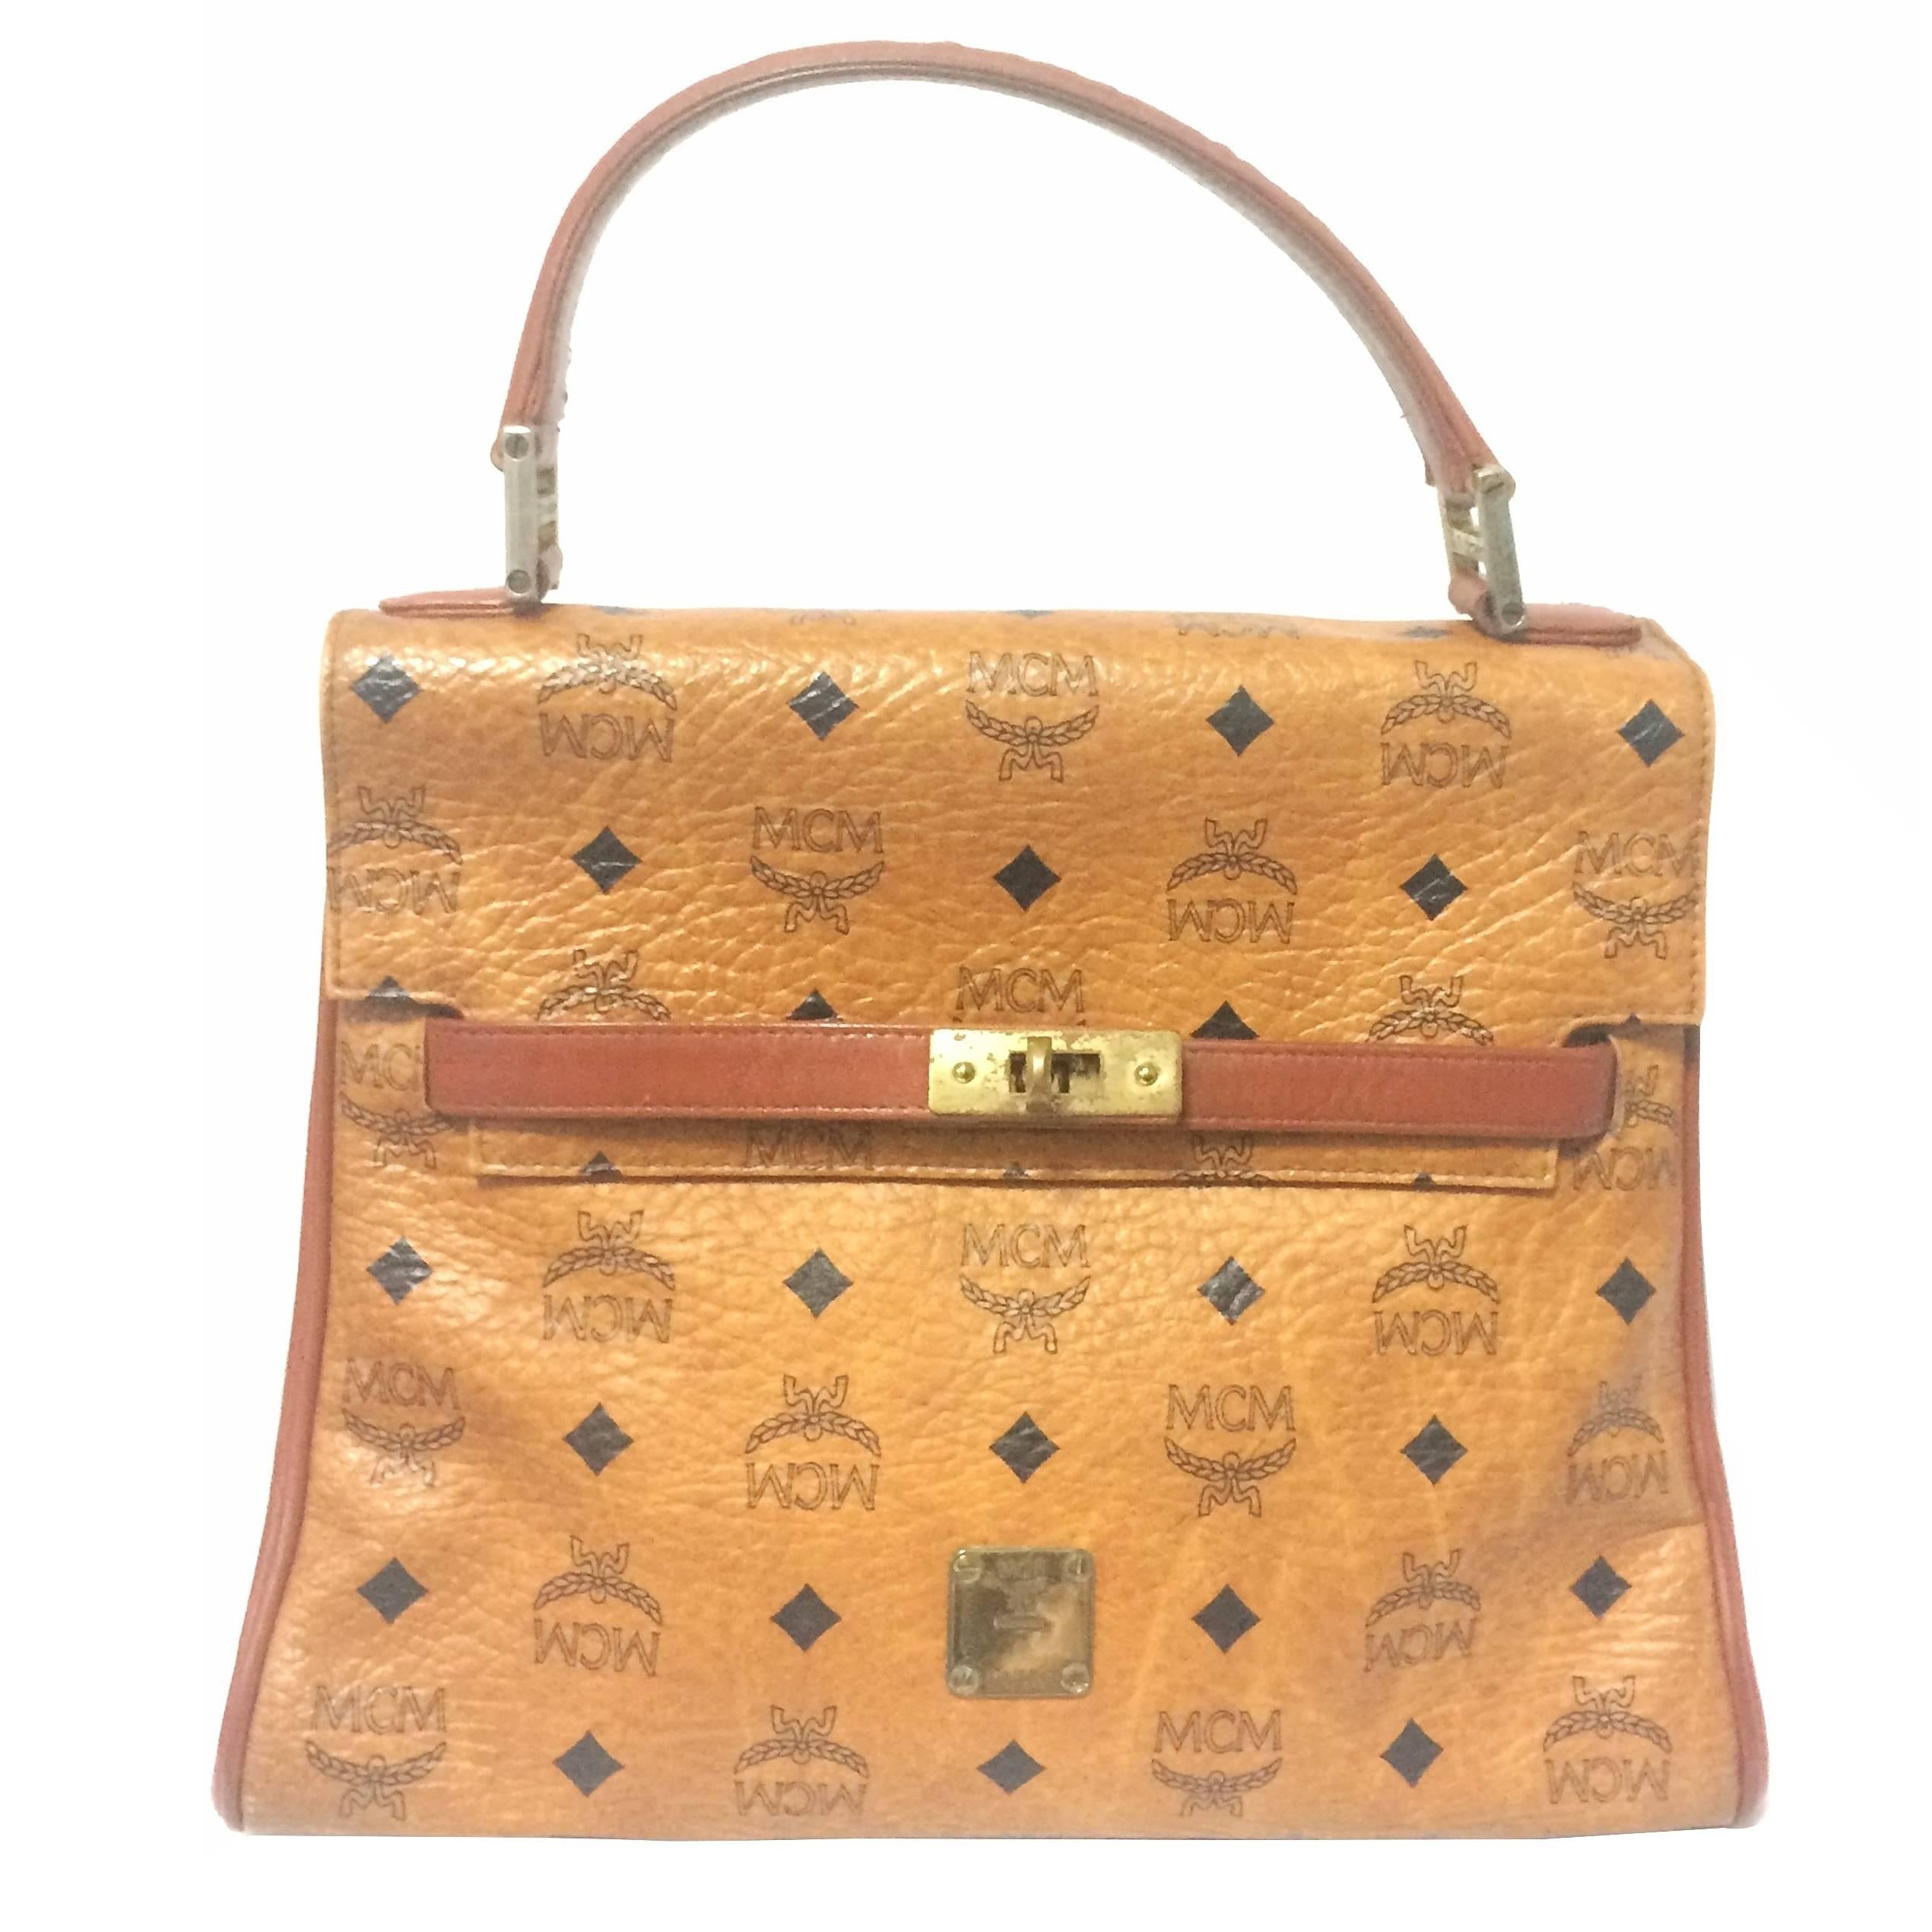 Vintage MCM Kelly style bag with golden logo plate in classic brown monogram.